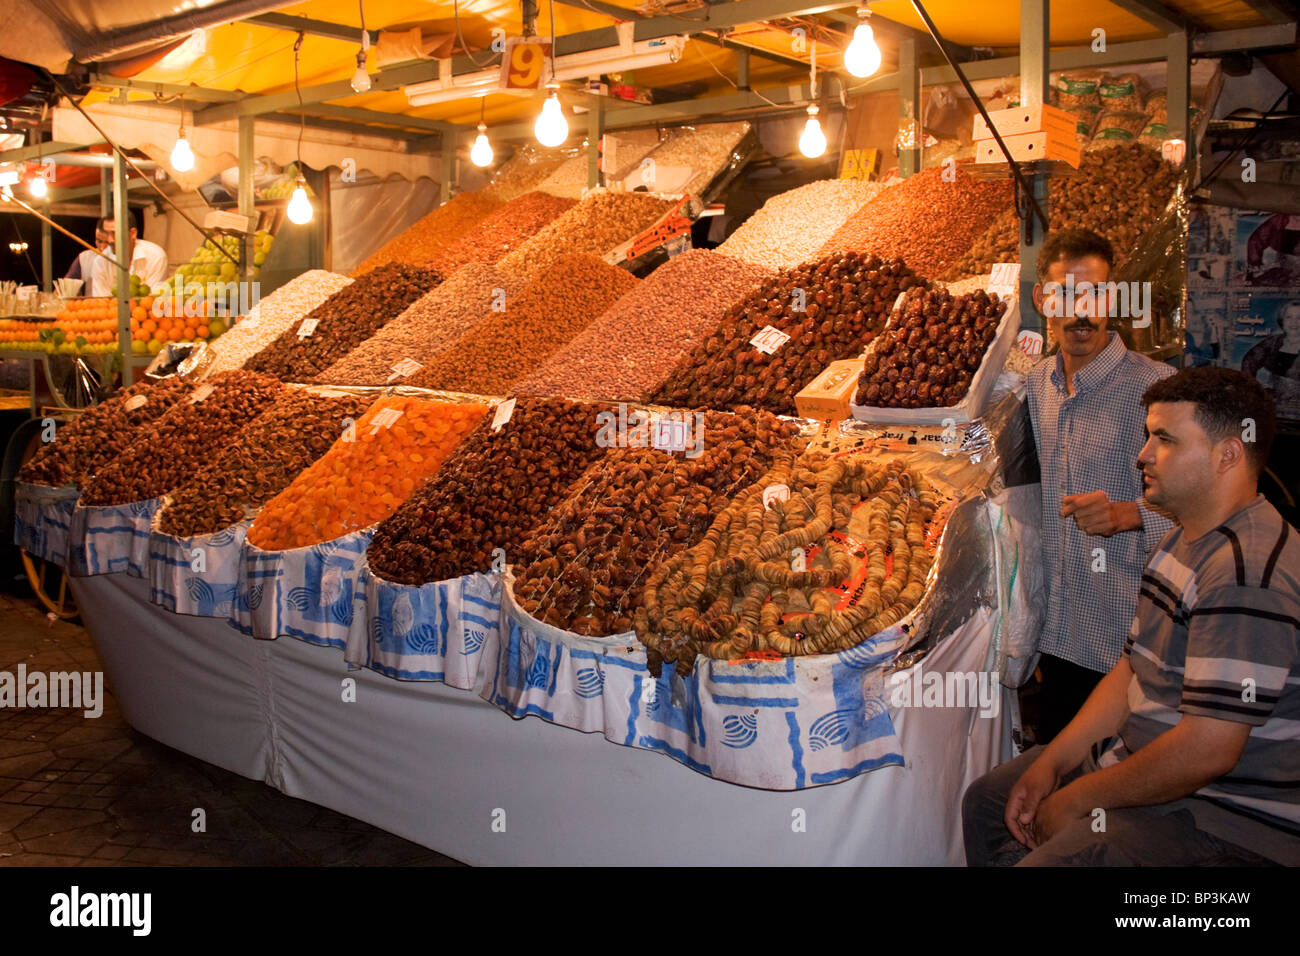 Fruit and nut sellers at Place Djemma el Fna, Marrakech Stock Photo